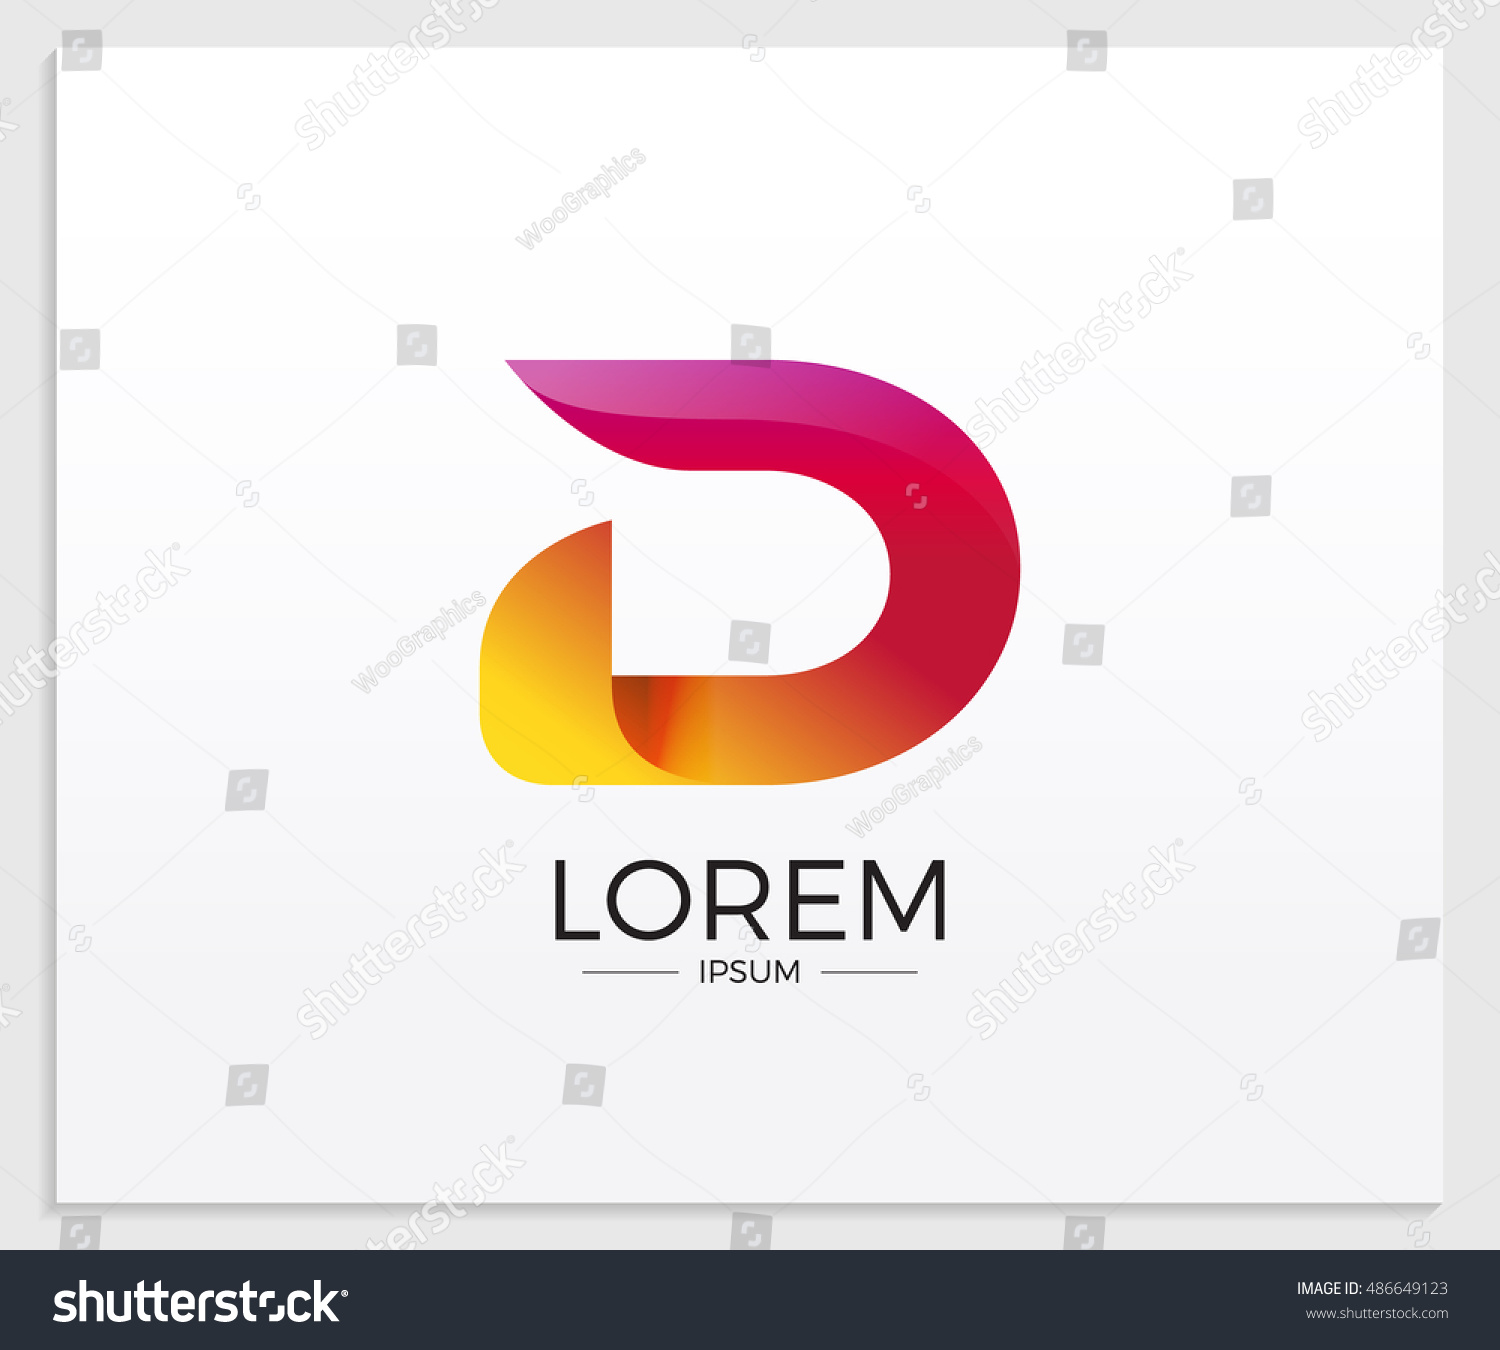 D Alphabet Letter Logo Abstract Glossy Stock Vector 486649123 ...